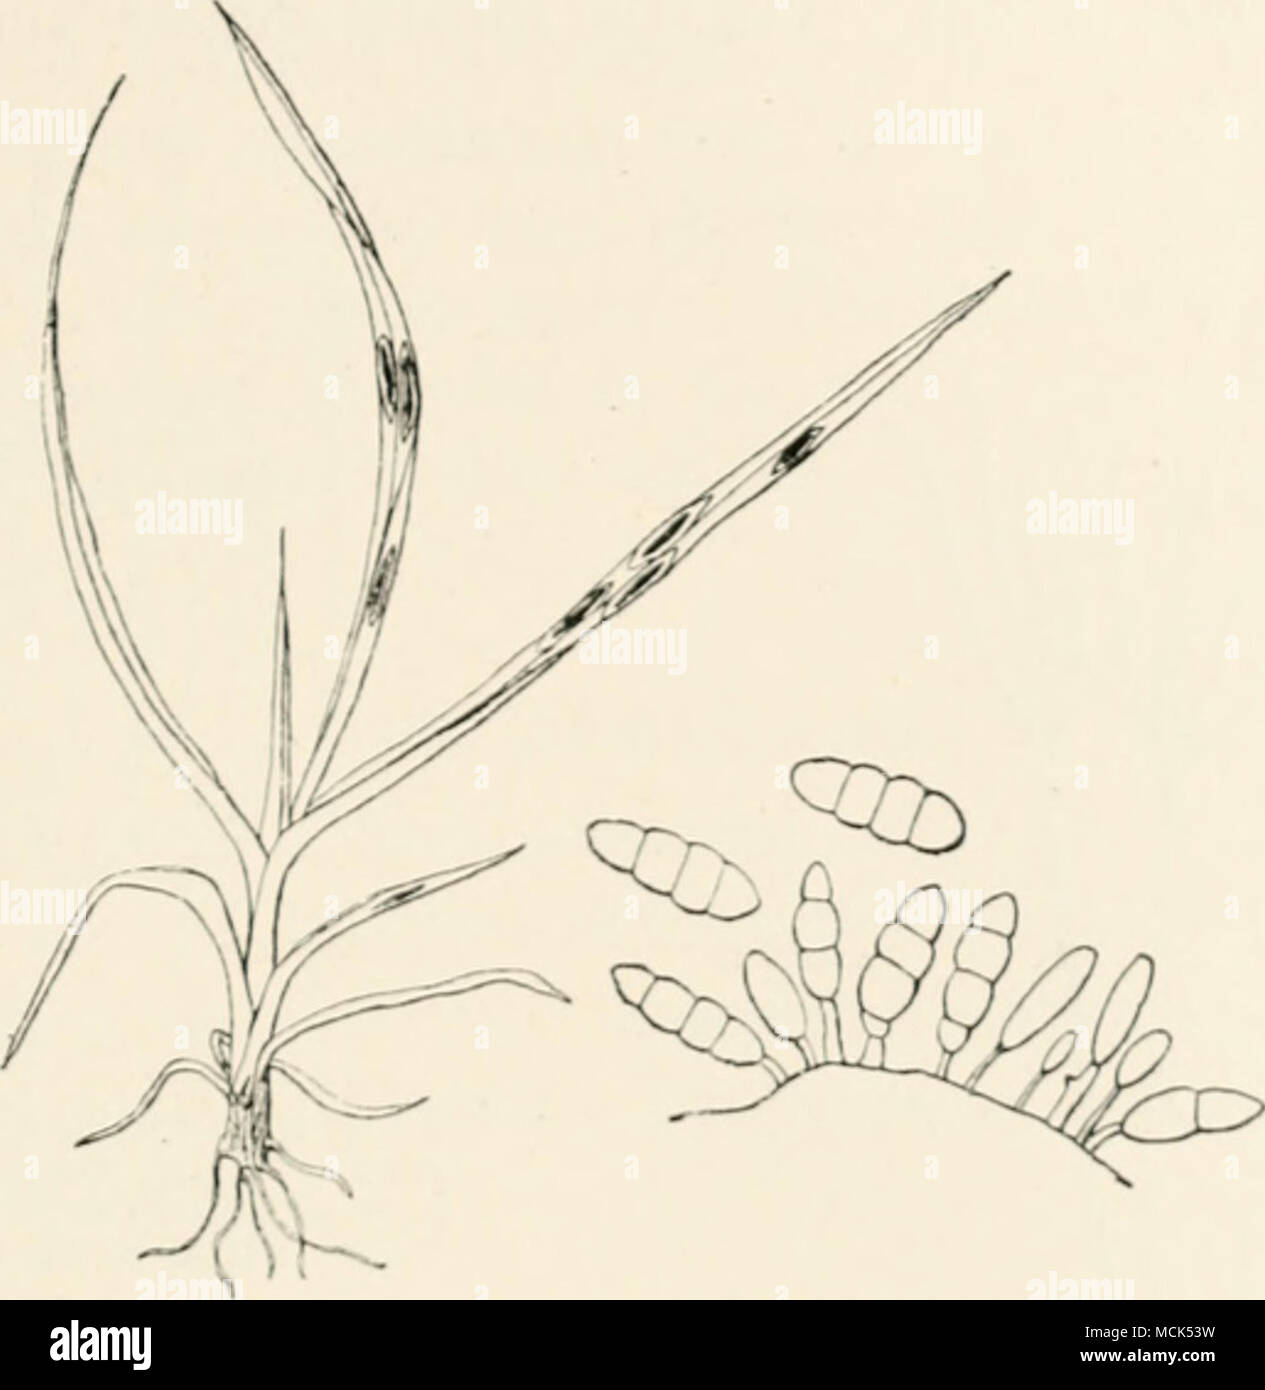 . Fio. 308.—Mastigotporium aWuii). (v. Tubeiif del.) conidia. Diseased plants may lie found 1&gt;earing this fungus only, frequently however it is in company with other fungi. Cercosporella. Conidia hyaline, similar to th(jse of t'lrcoxporn, and produced from sinijilc or branclicil hyaline conidiophores. Cercosporella persica Saec. is parasitic on living leaves of peach. Ill .Viiicrica it has been known since ISllO, and receives the naiiiL' of &quot;frosty mildew.&quot; It causes yellow spot.s on the jow.-r surface nf the leaf. C. pastinacae Karst. (jccurs on lising leaves of cuhiated jtar.si Stock Photo